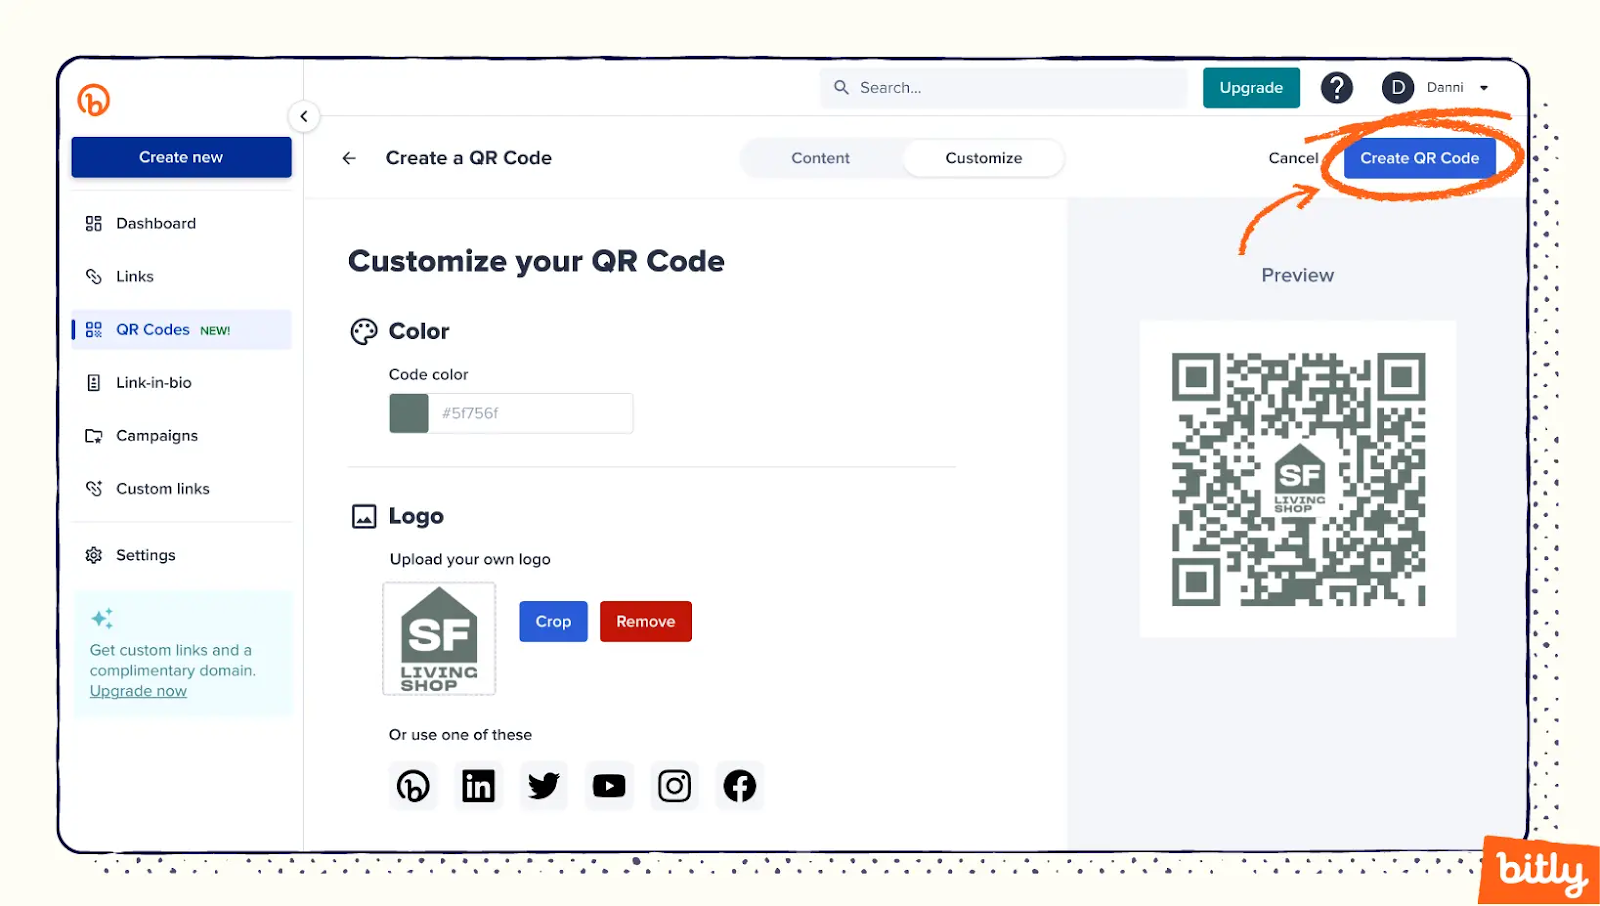 A screenshot showing where you can click to create the QR Code after customization